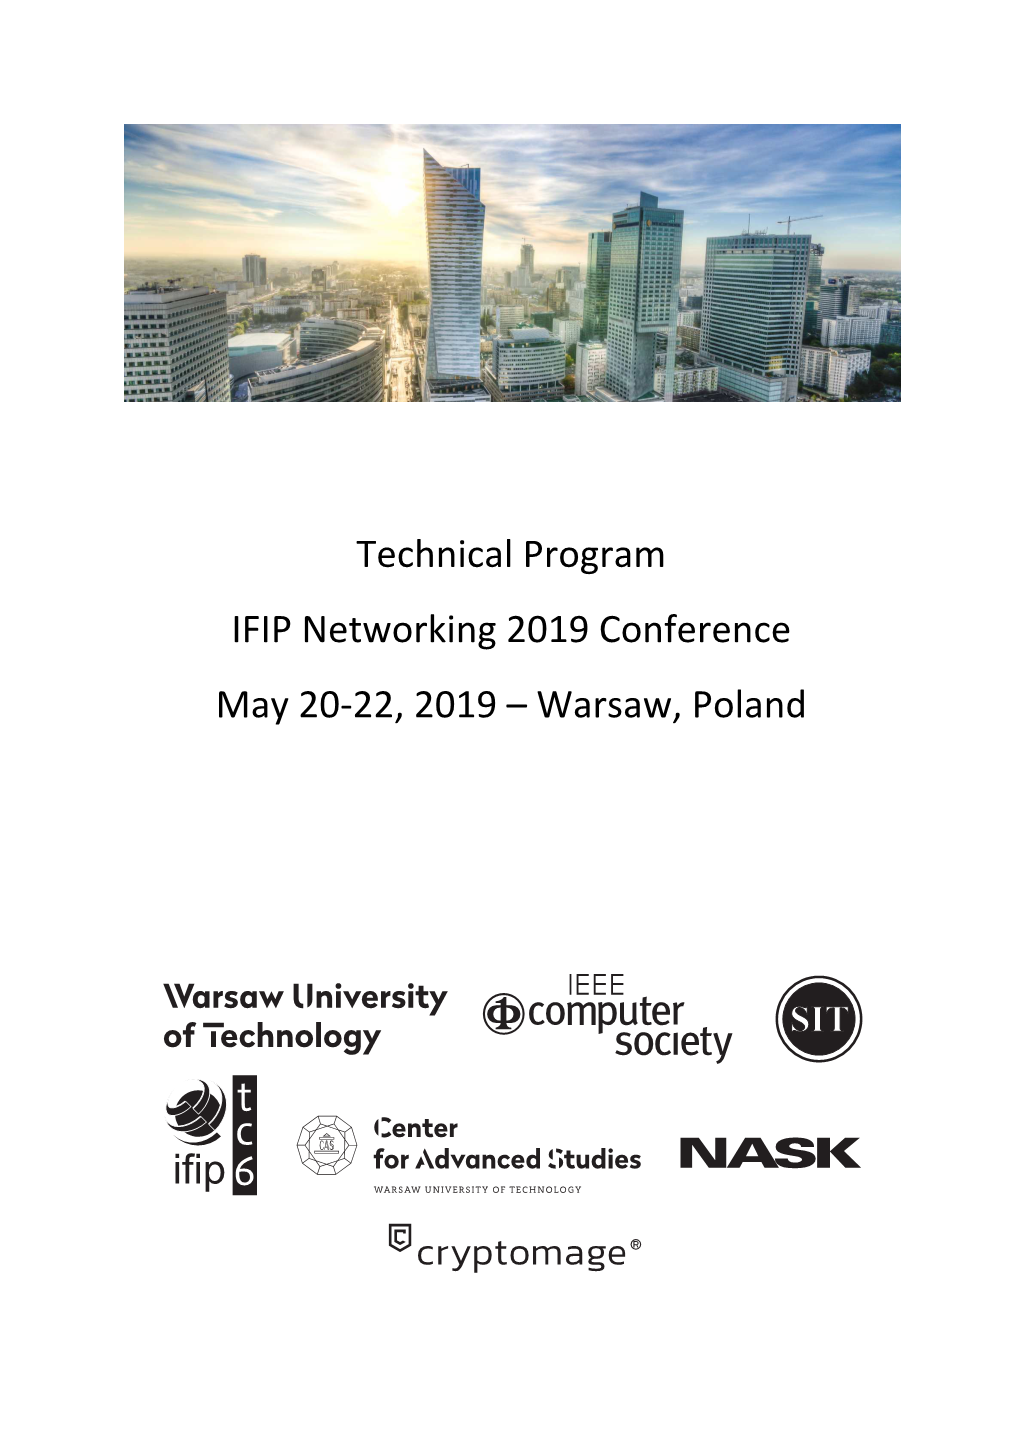 Technical Program IFIP Networking 2019 Conference May 20-22, 2019 – Warsaw, Poland